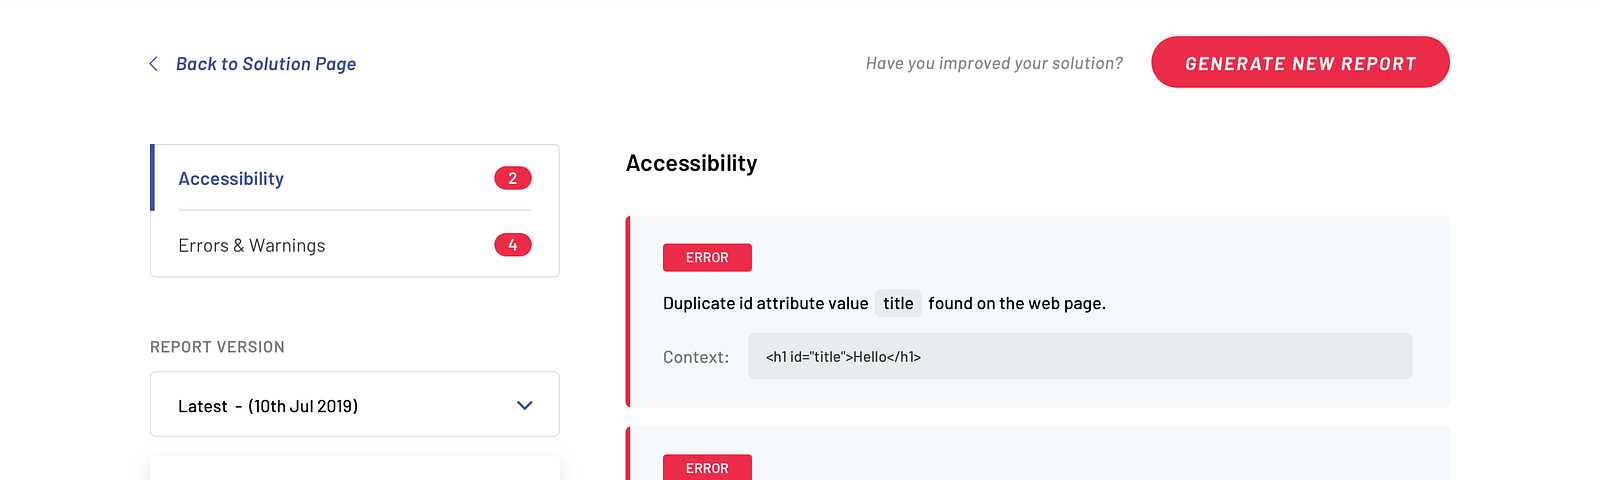 Accessibility report for a challenge solution on the Frontend Mentor platform